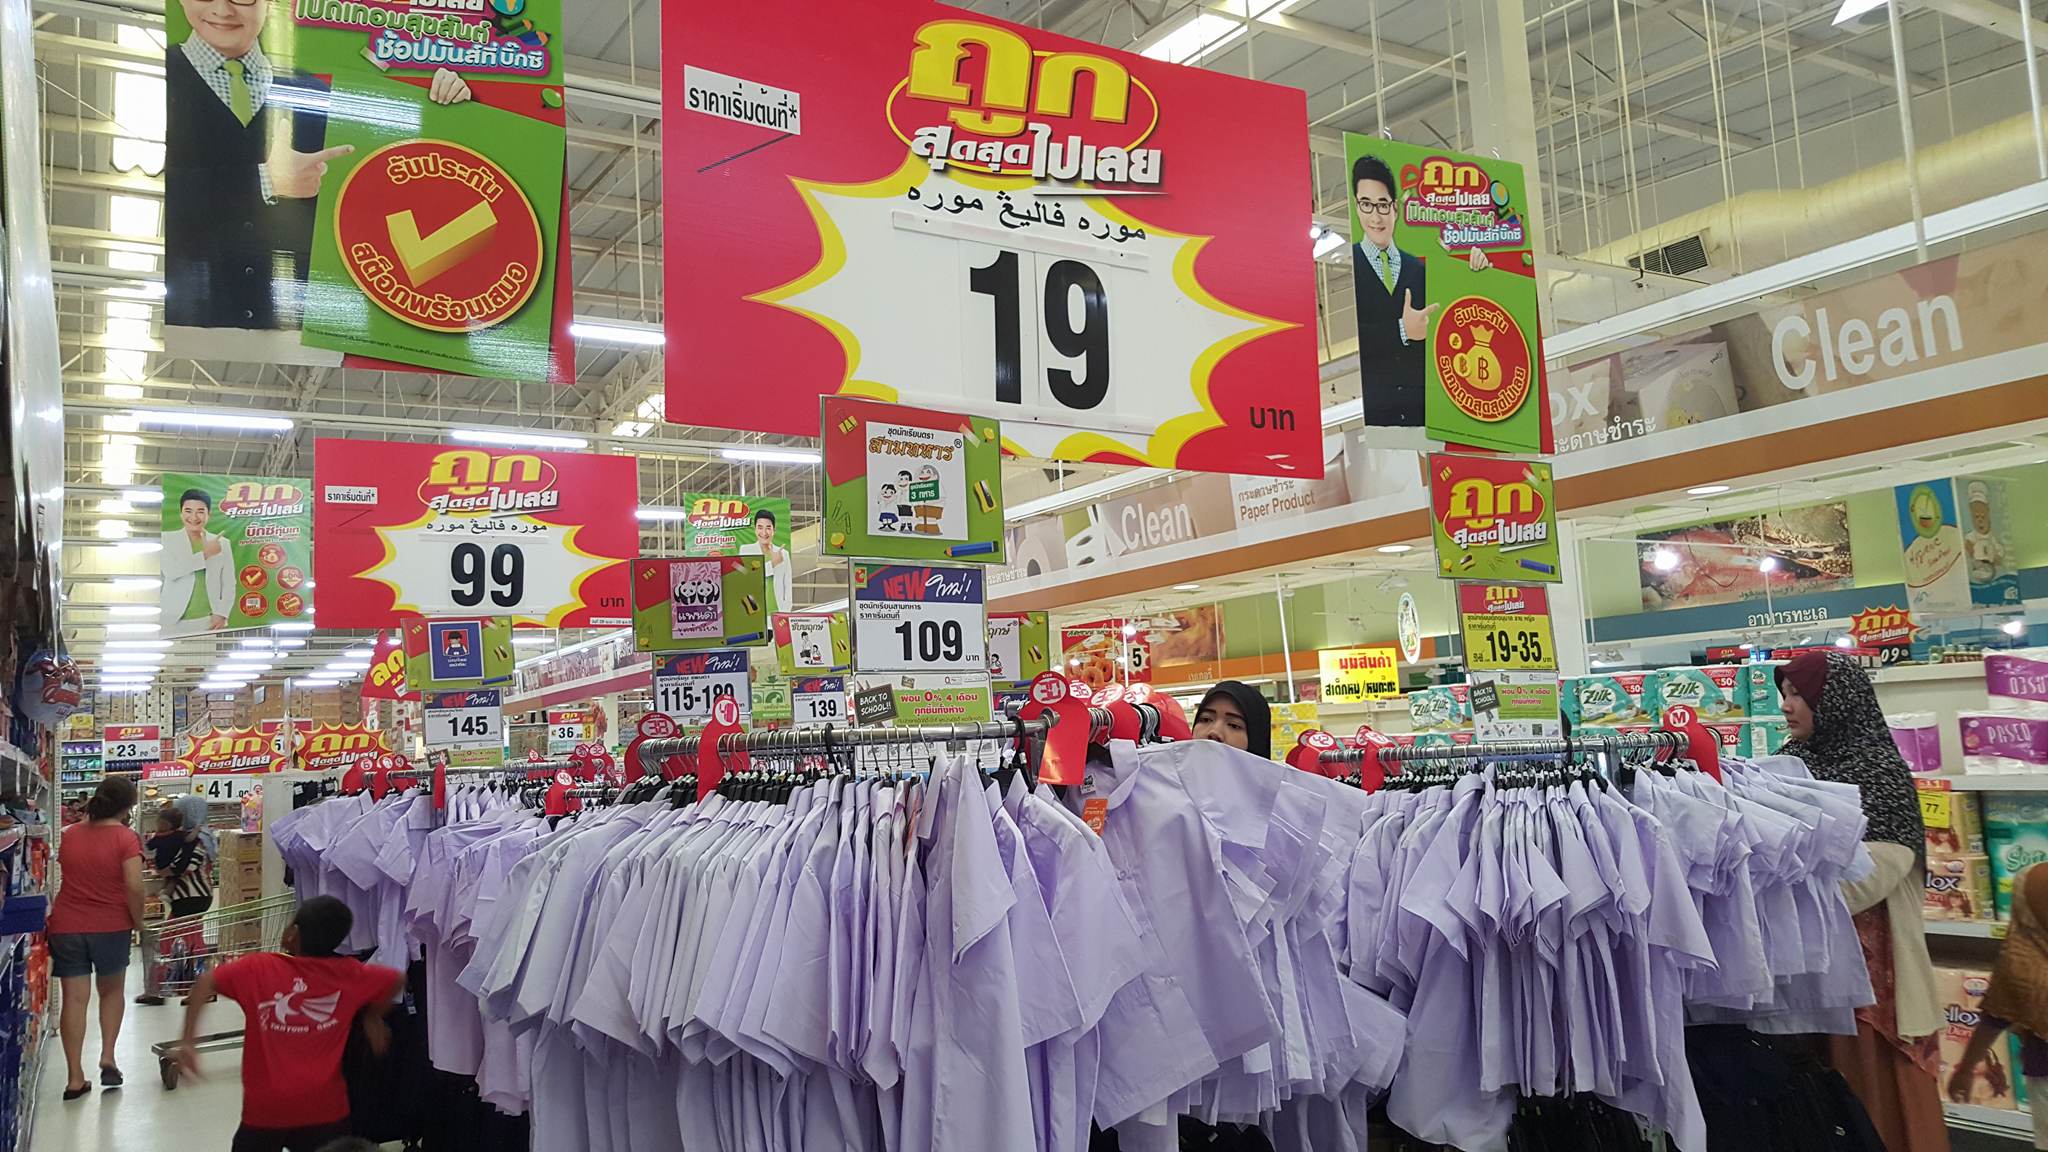 Thailand News - 28-04-17 3 NNT Affordable school supplies now available at various stores across BKK. 1JPG